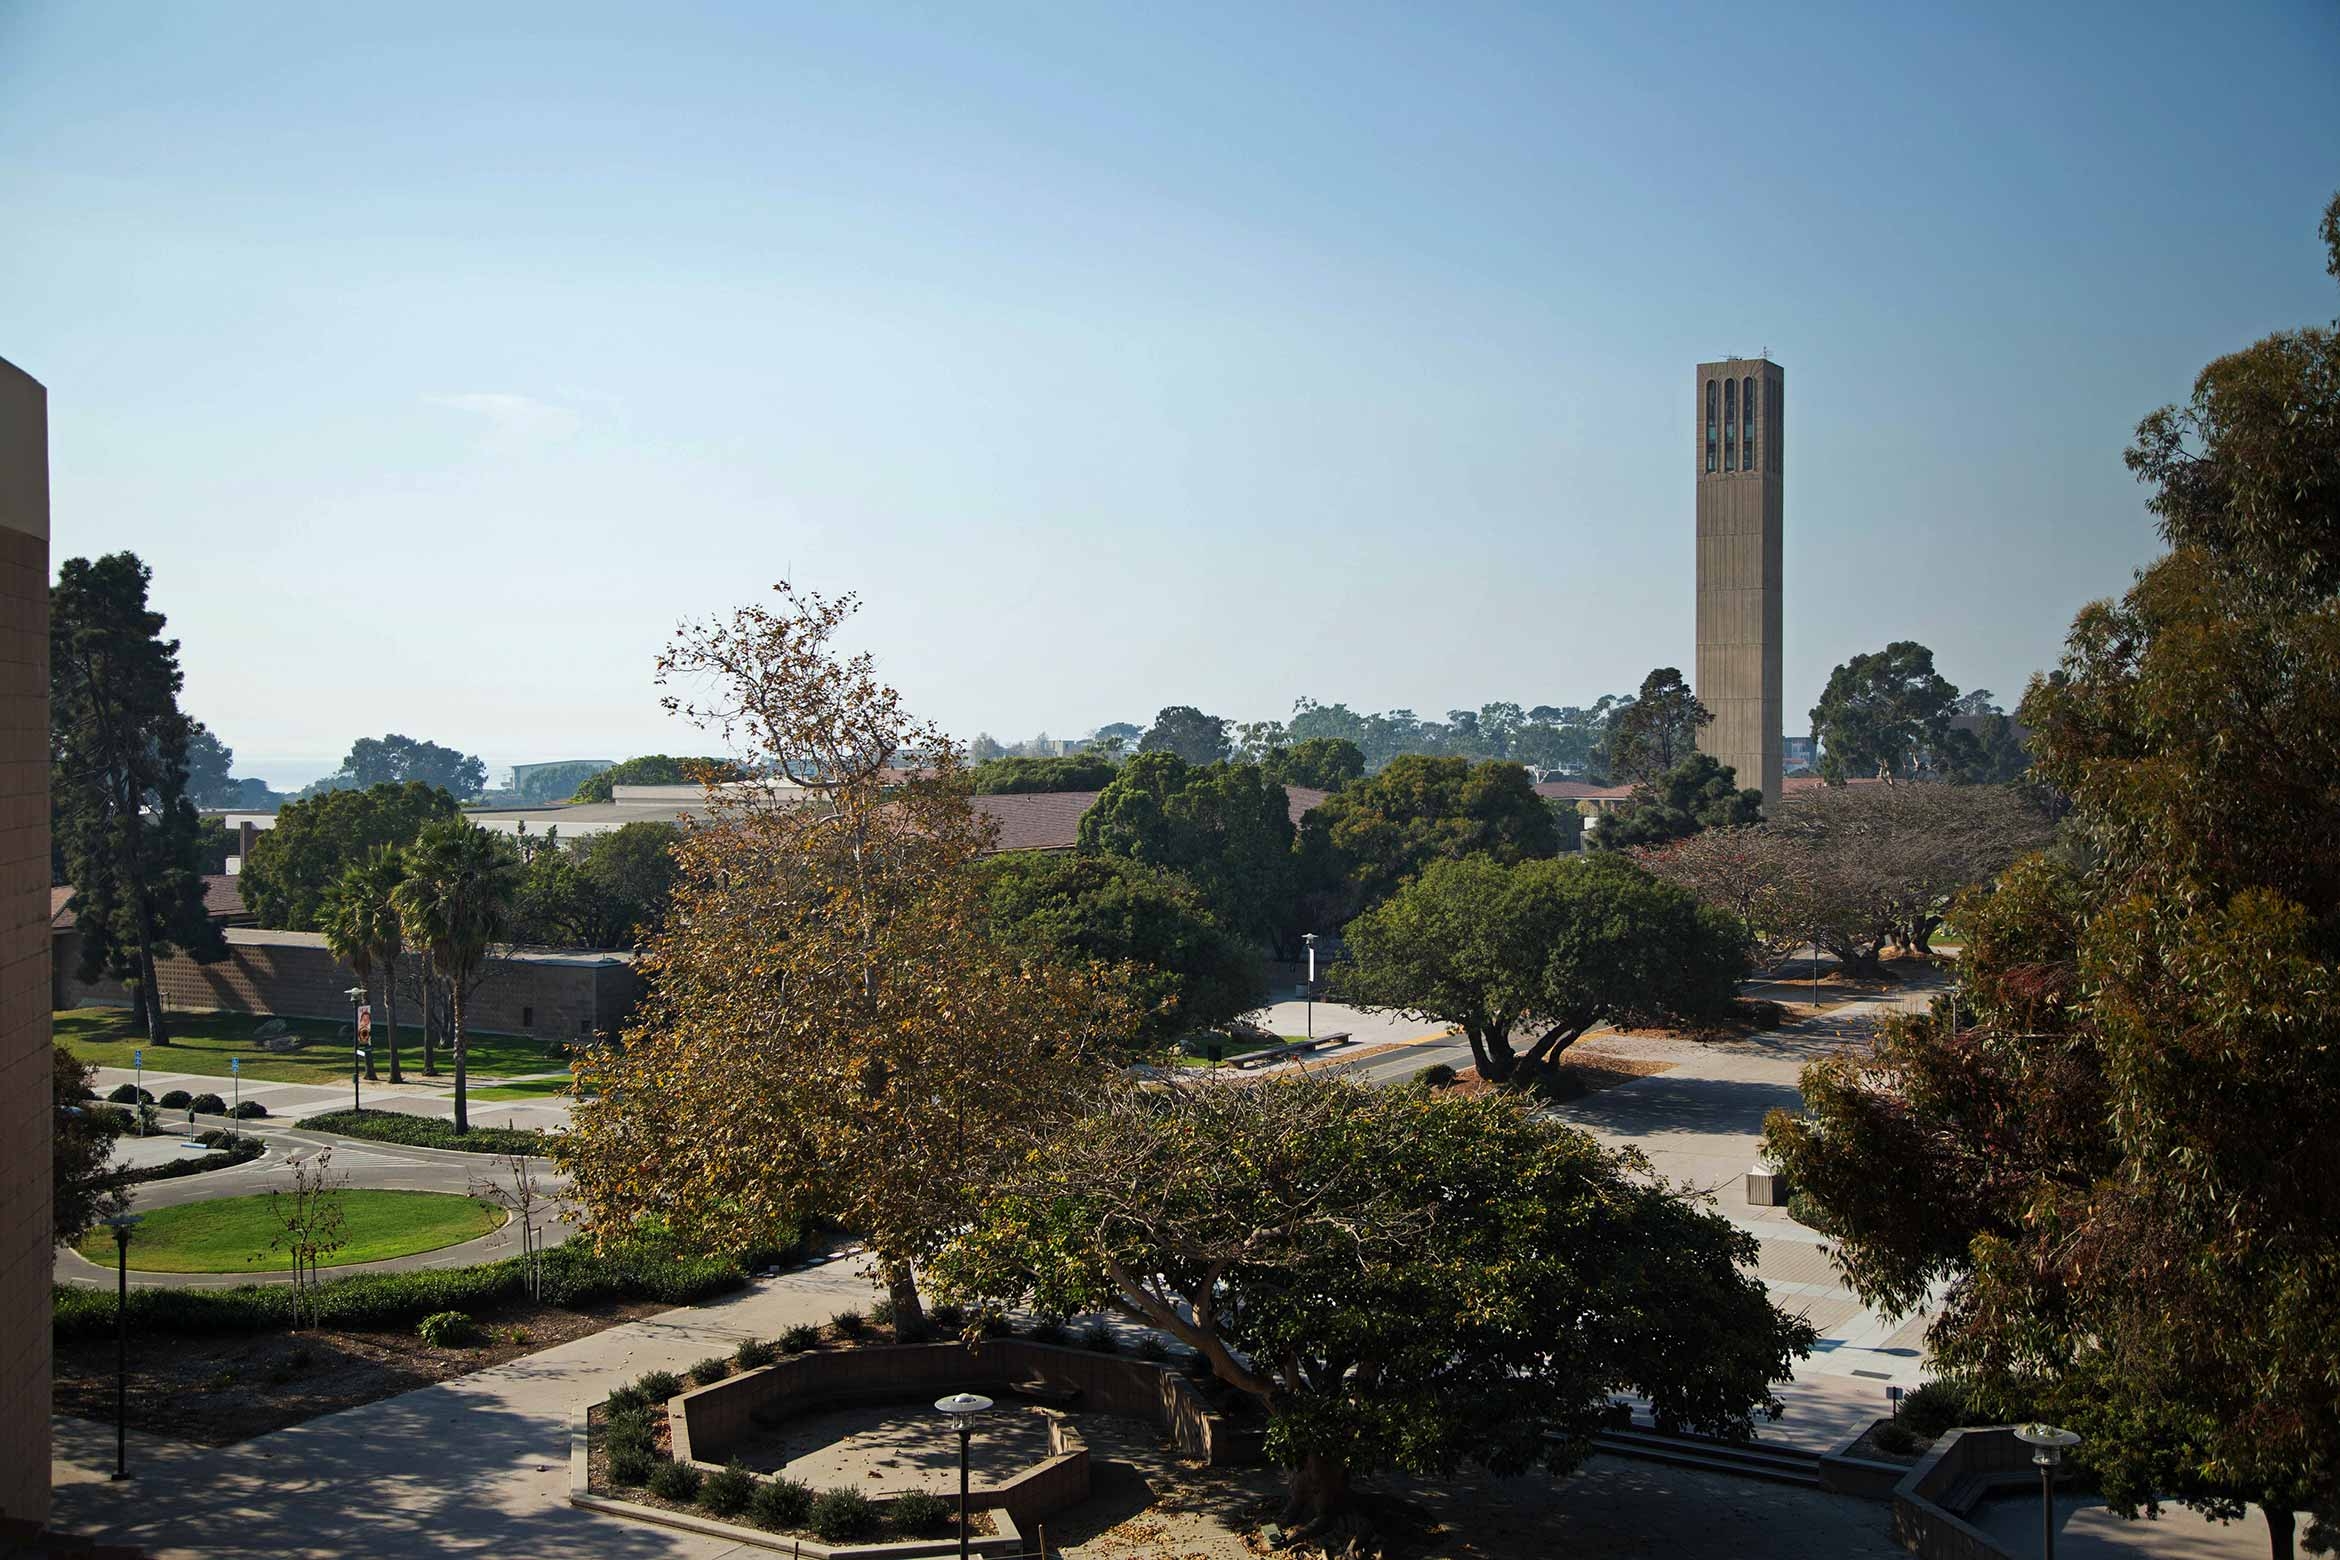 The campus canopy with Storke Tower in the background.